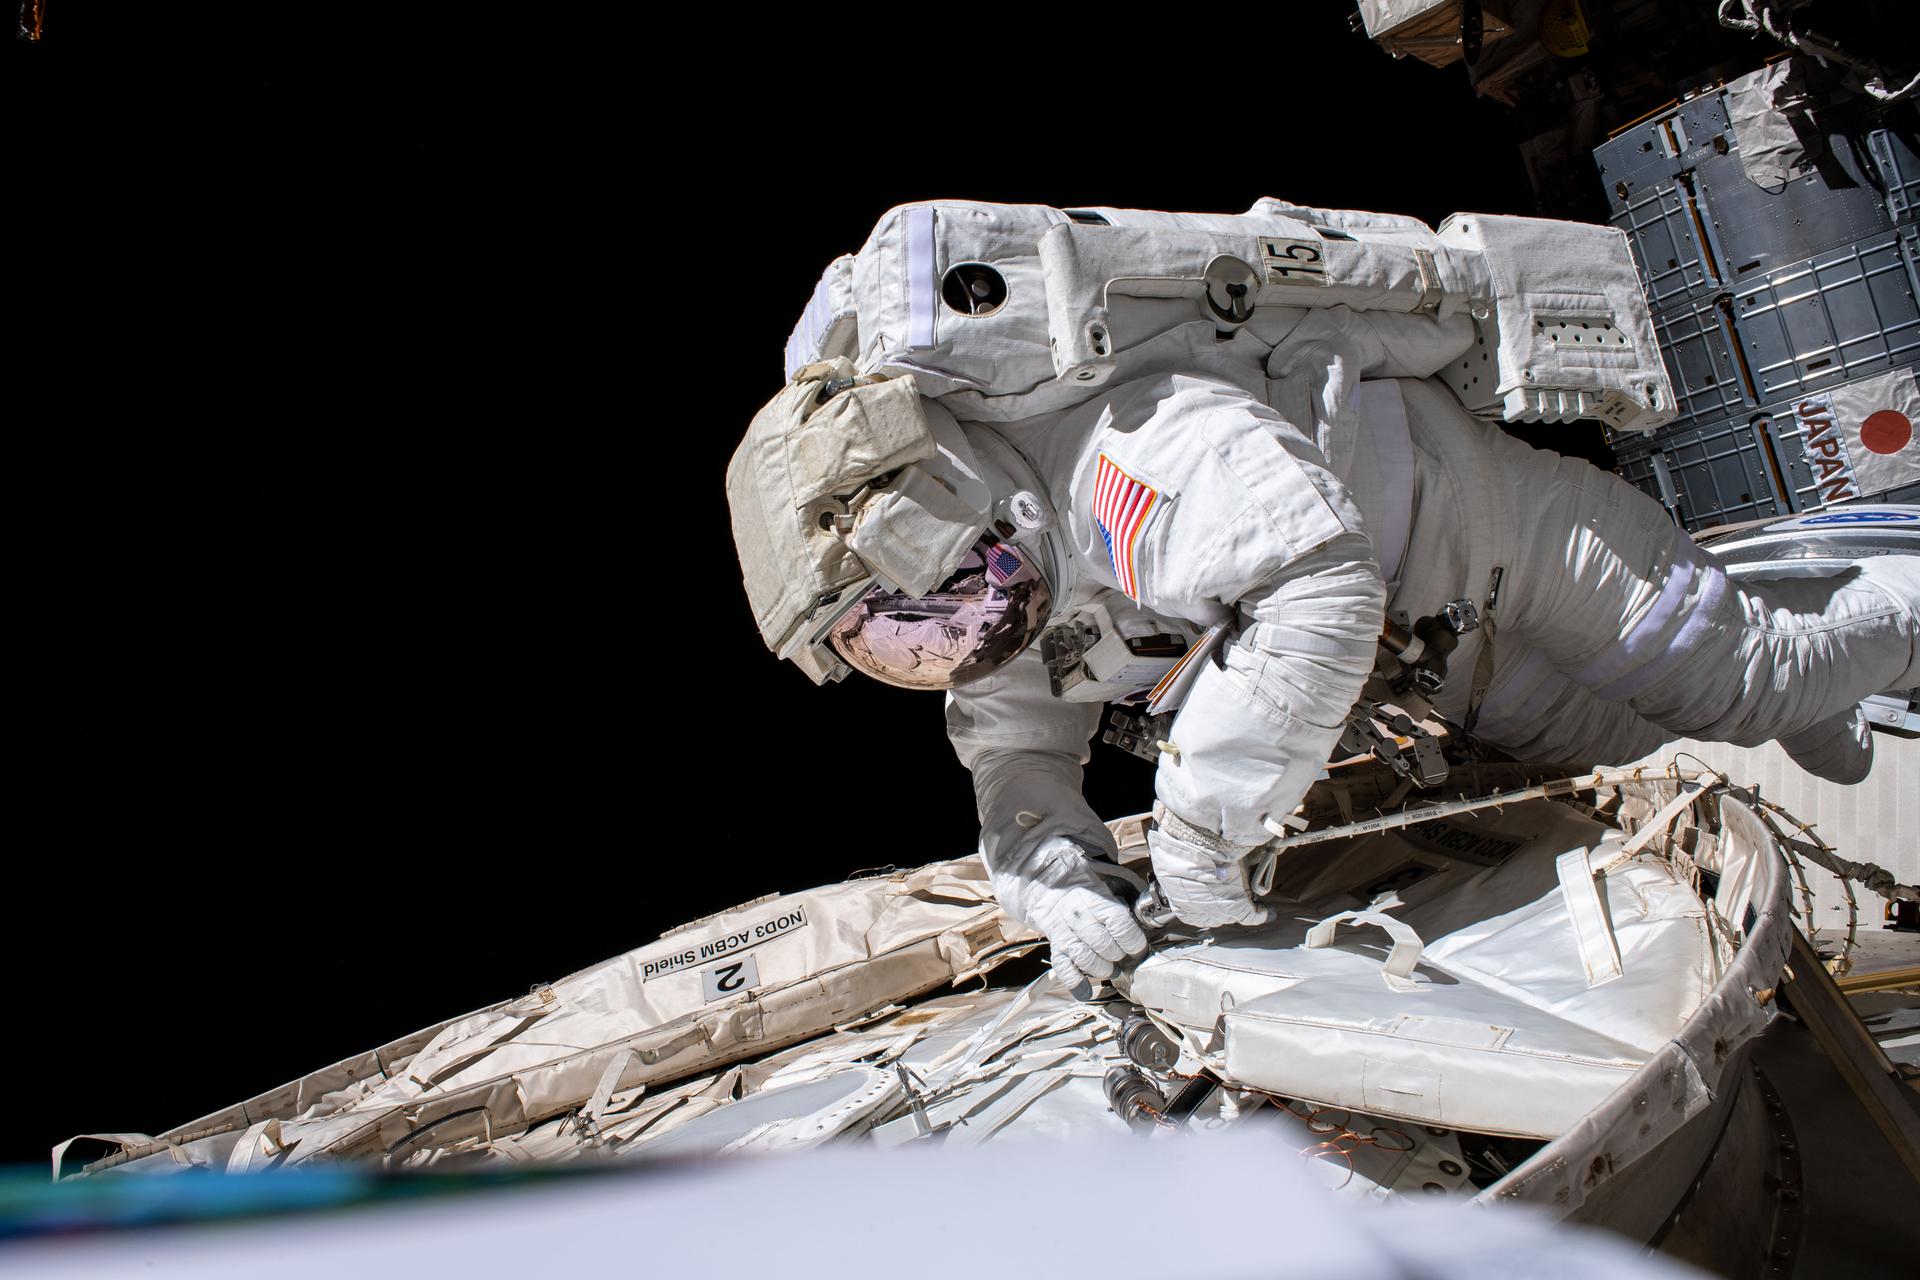 Against the black backdrop of the vacuum of space, NASA astronaut Chris Cassidy, entirely shielded by a spacesuit, works on maintenance outside the International Space Station. Using a wrench-type tool in his hands, he makes adjustments to a white outer layer of the orbiting laboratory.